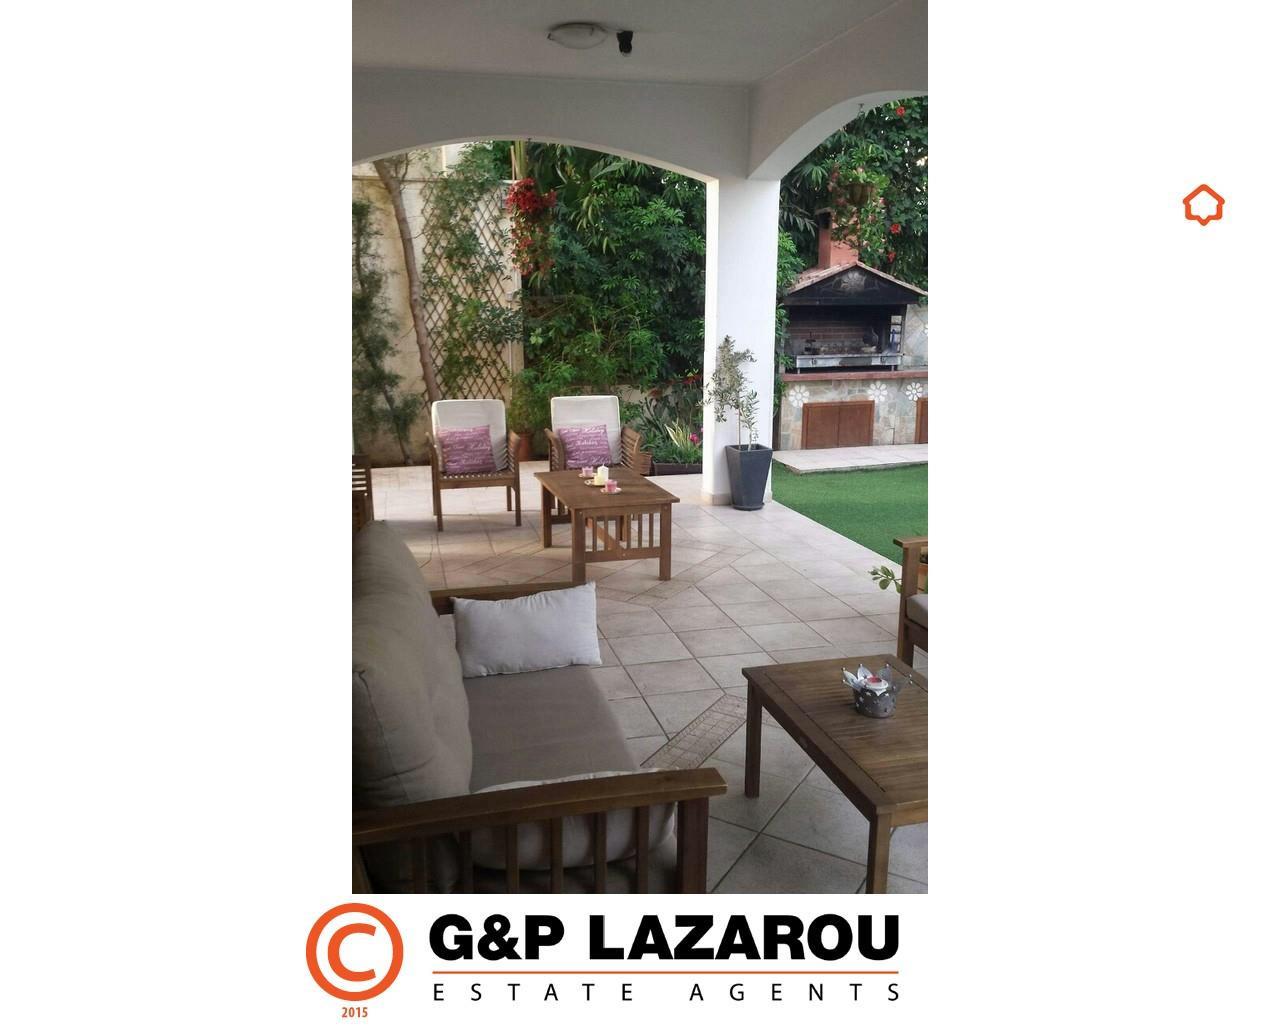 5 Bedroom House for Sale in Potamos Germasogeias, Limassol District